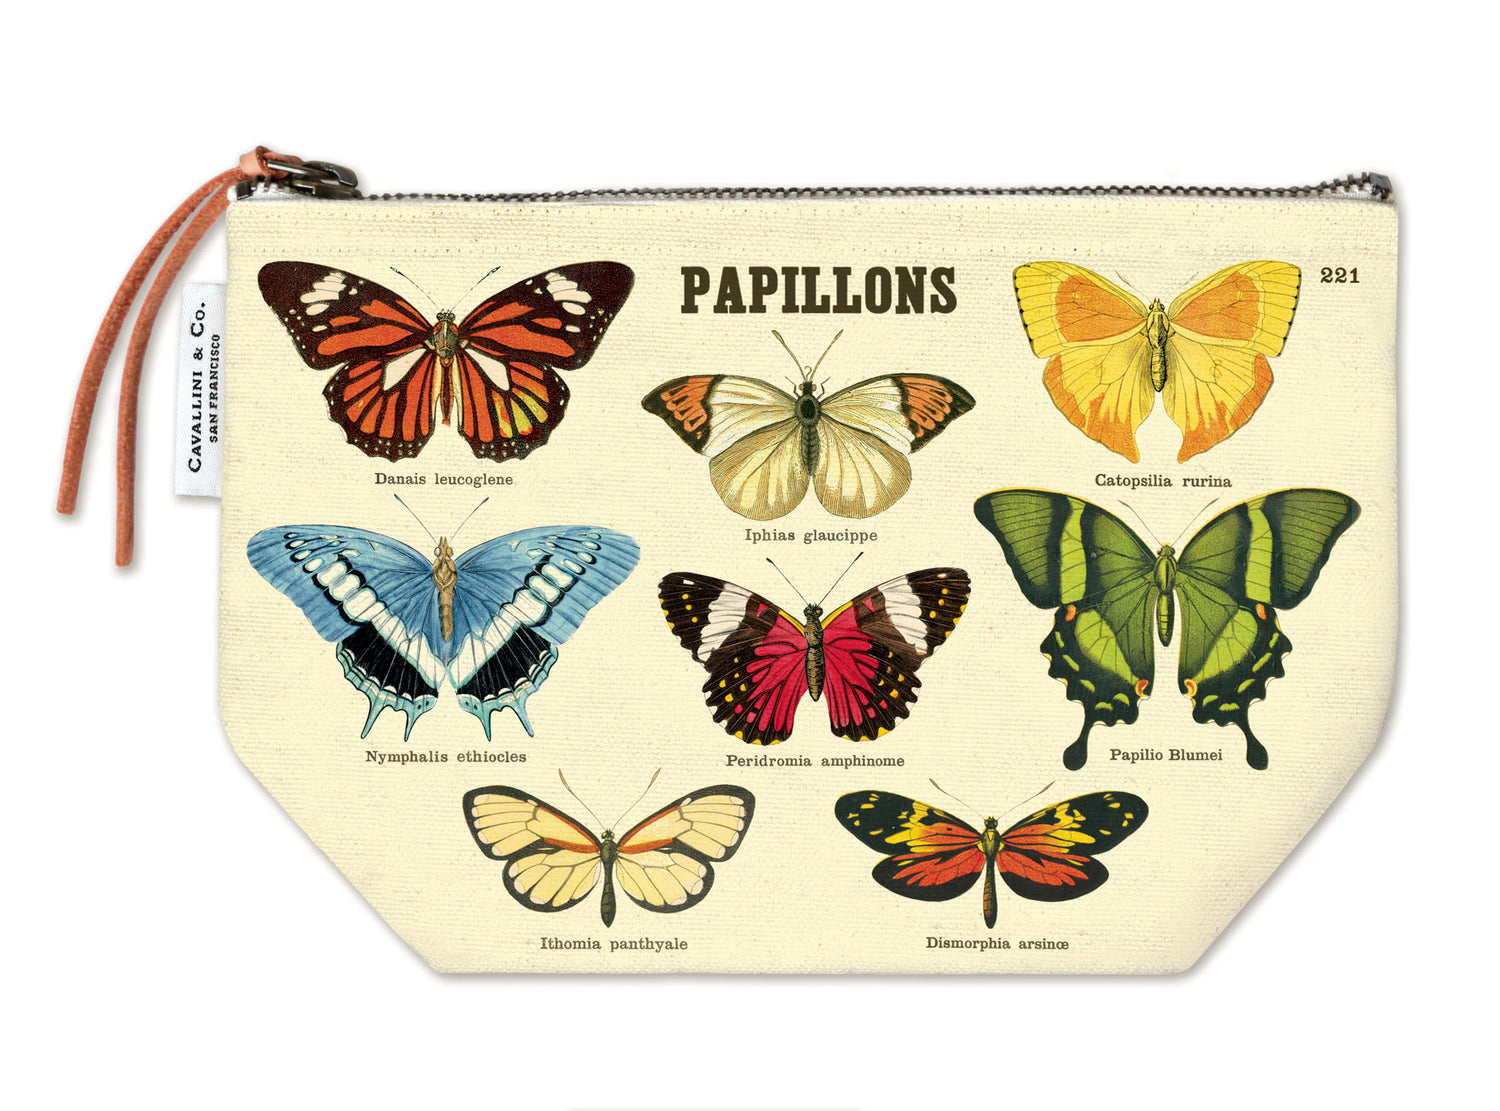 A zippered Vintage Pouch with flowers and birds on it, inspired by Cavallini Art Archives from Cavallini Papers &amp; Co.